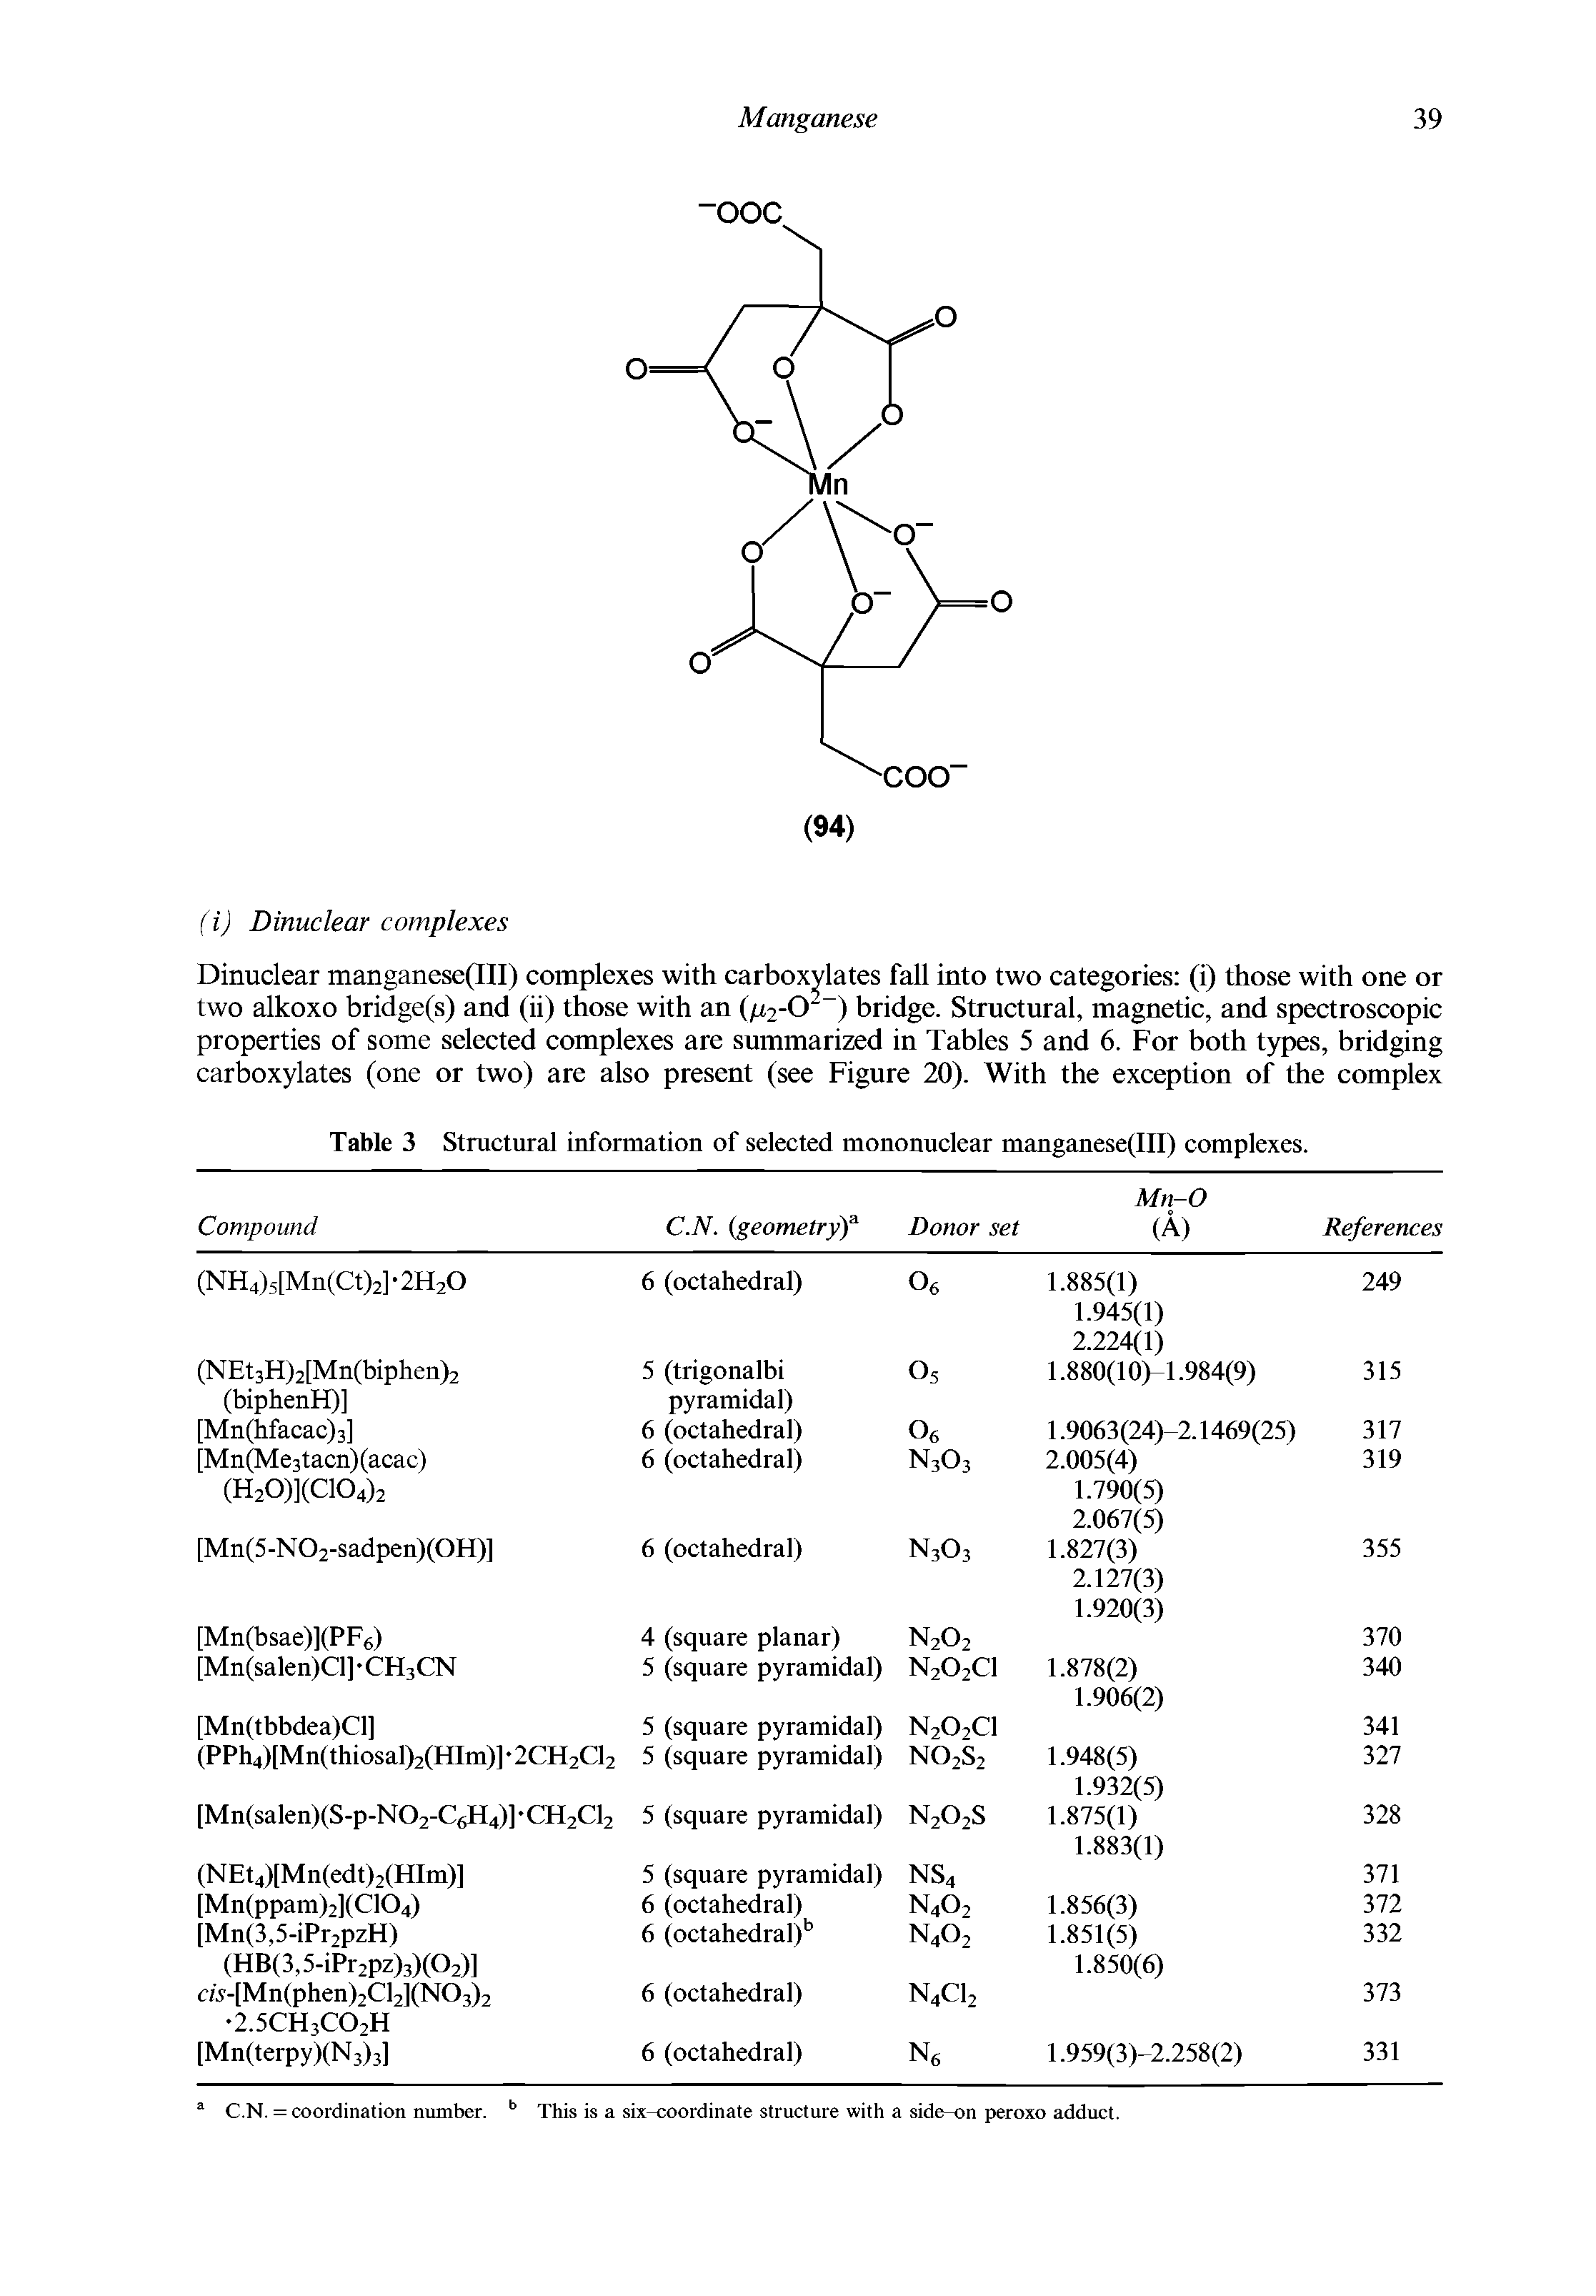 Table 3 Structural information of selected mononuclear manganese(III) complexes.